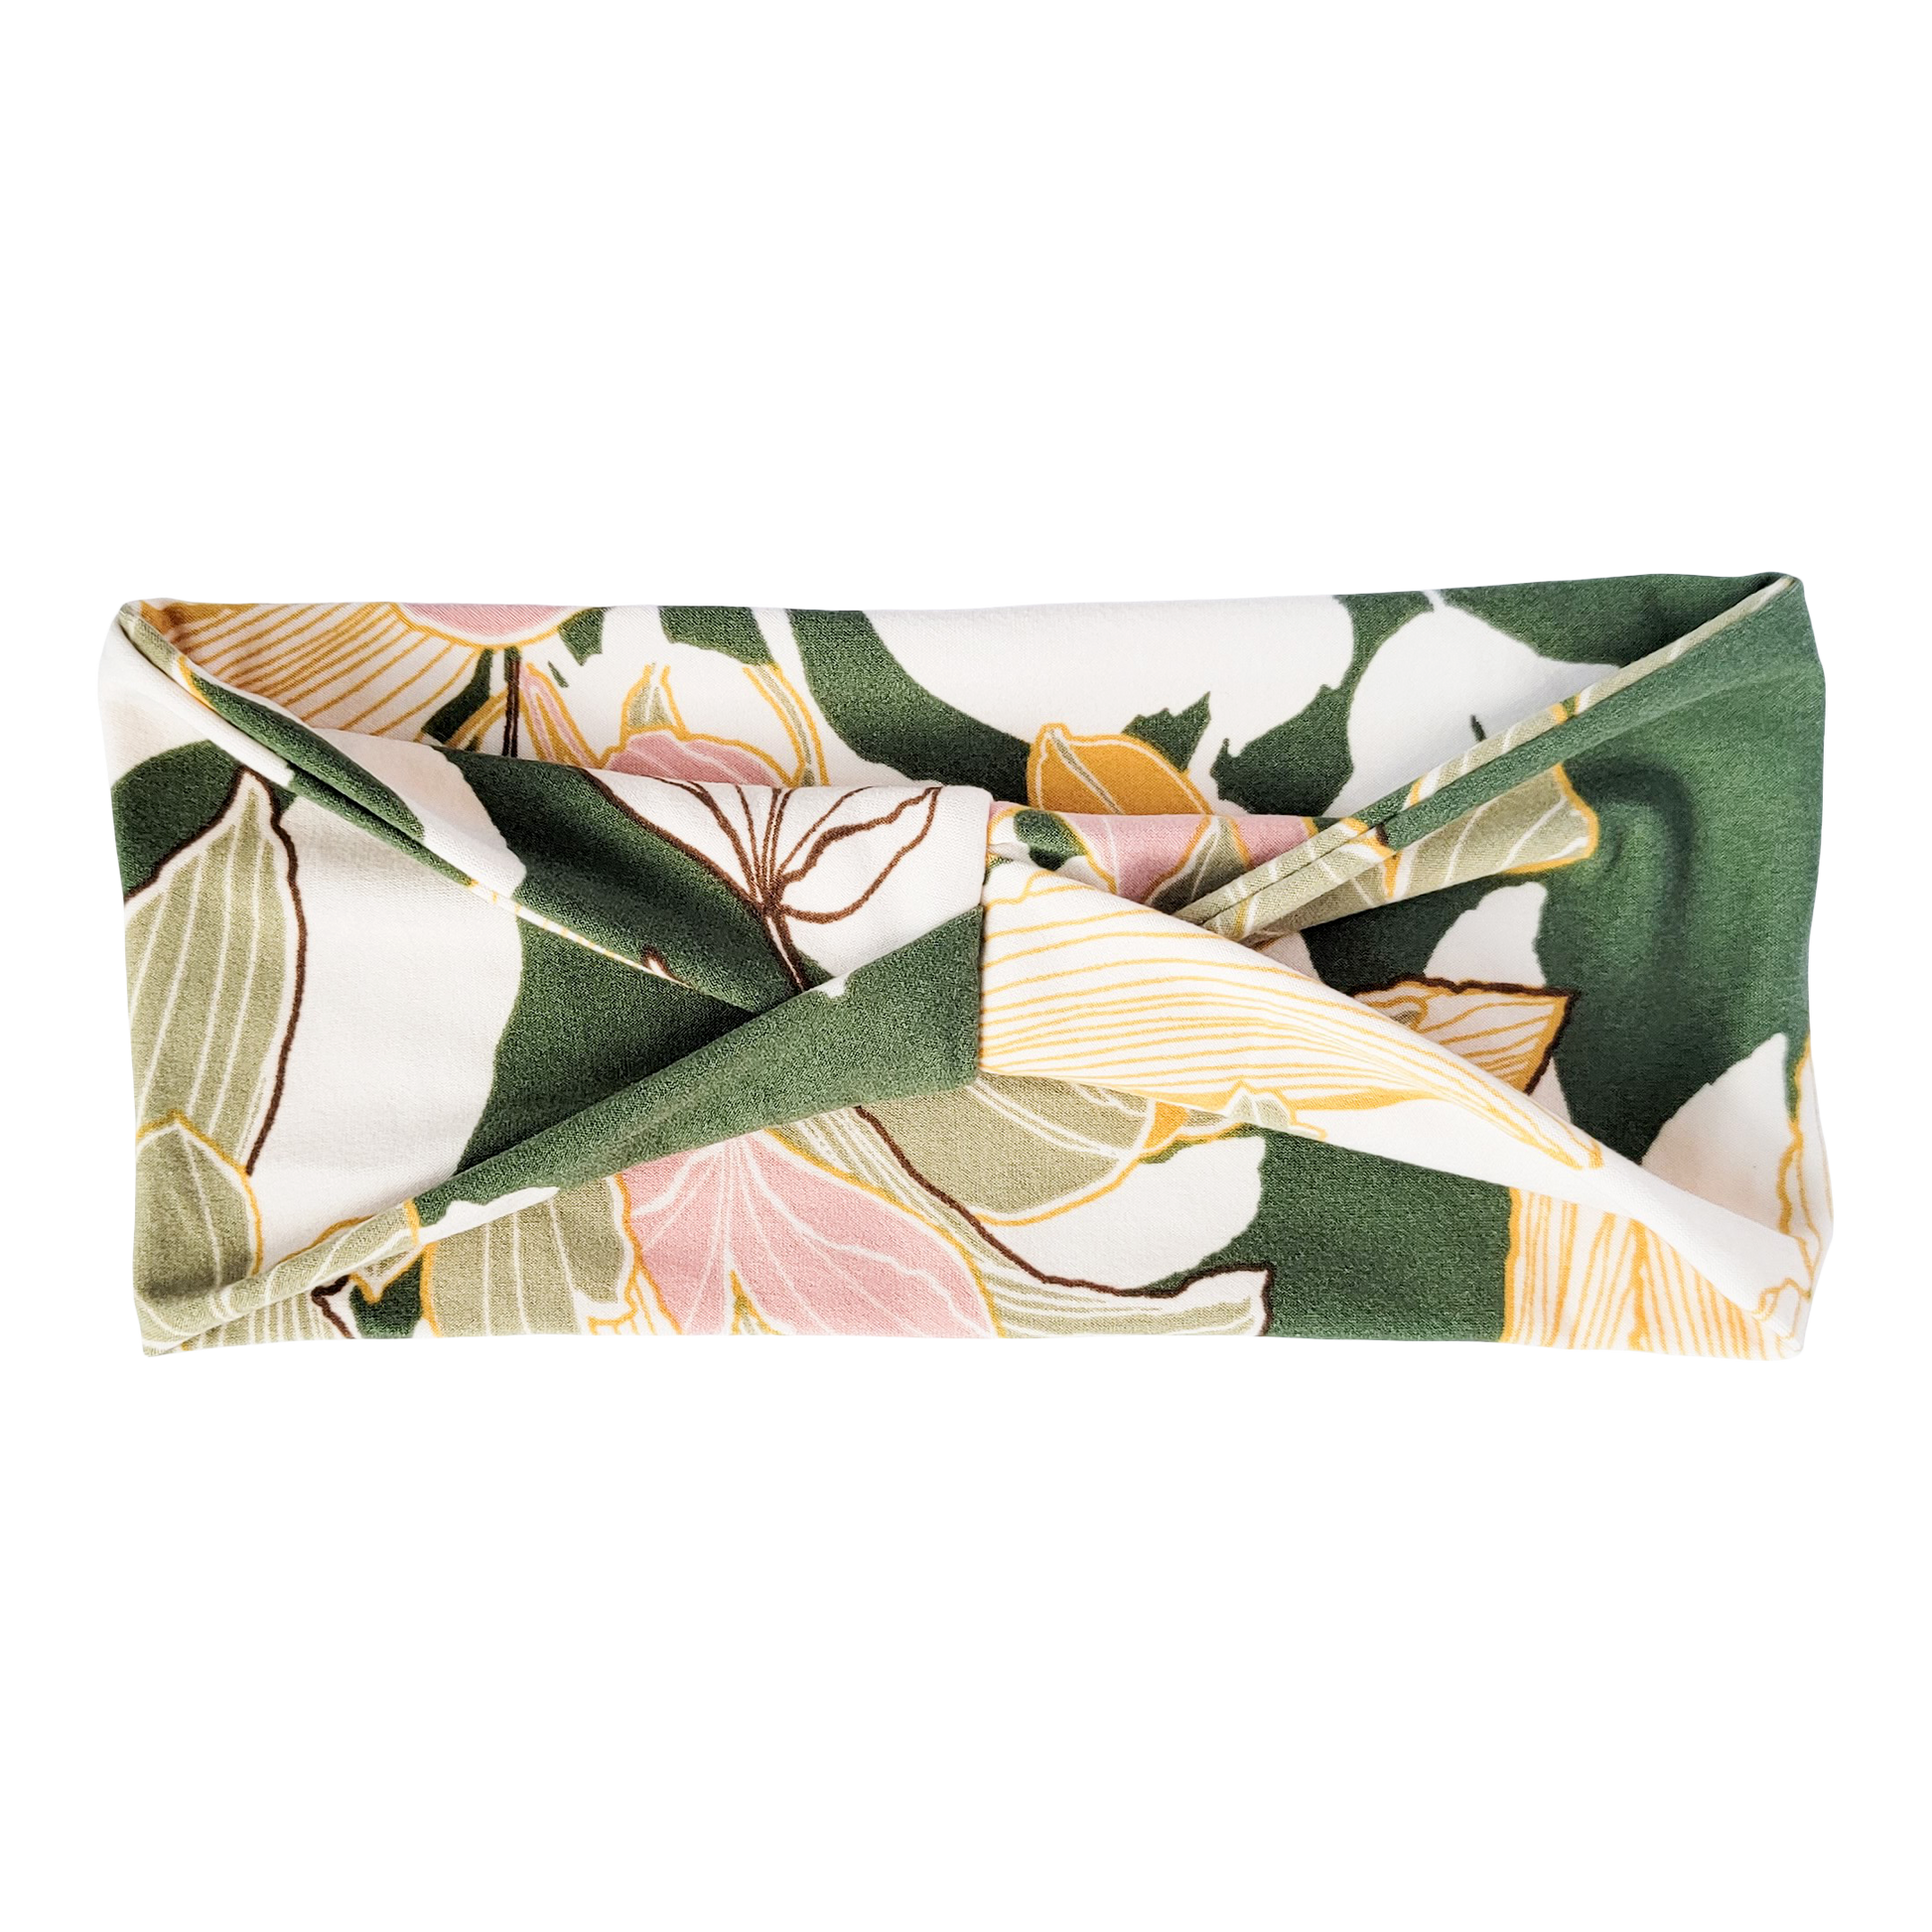 Headband with yellow white and pink flowers on dark green